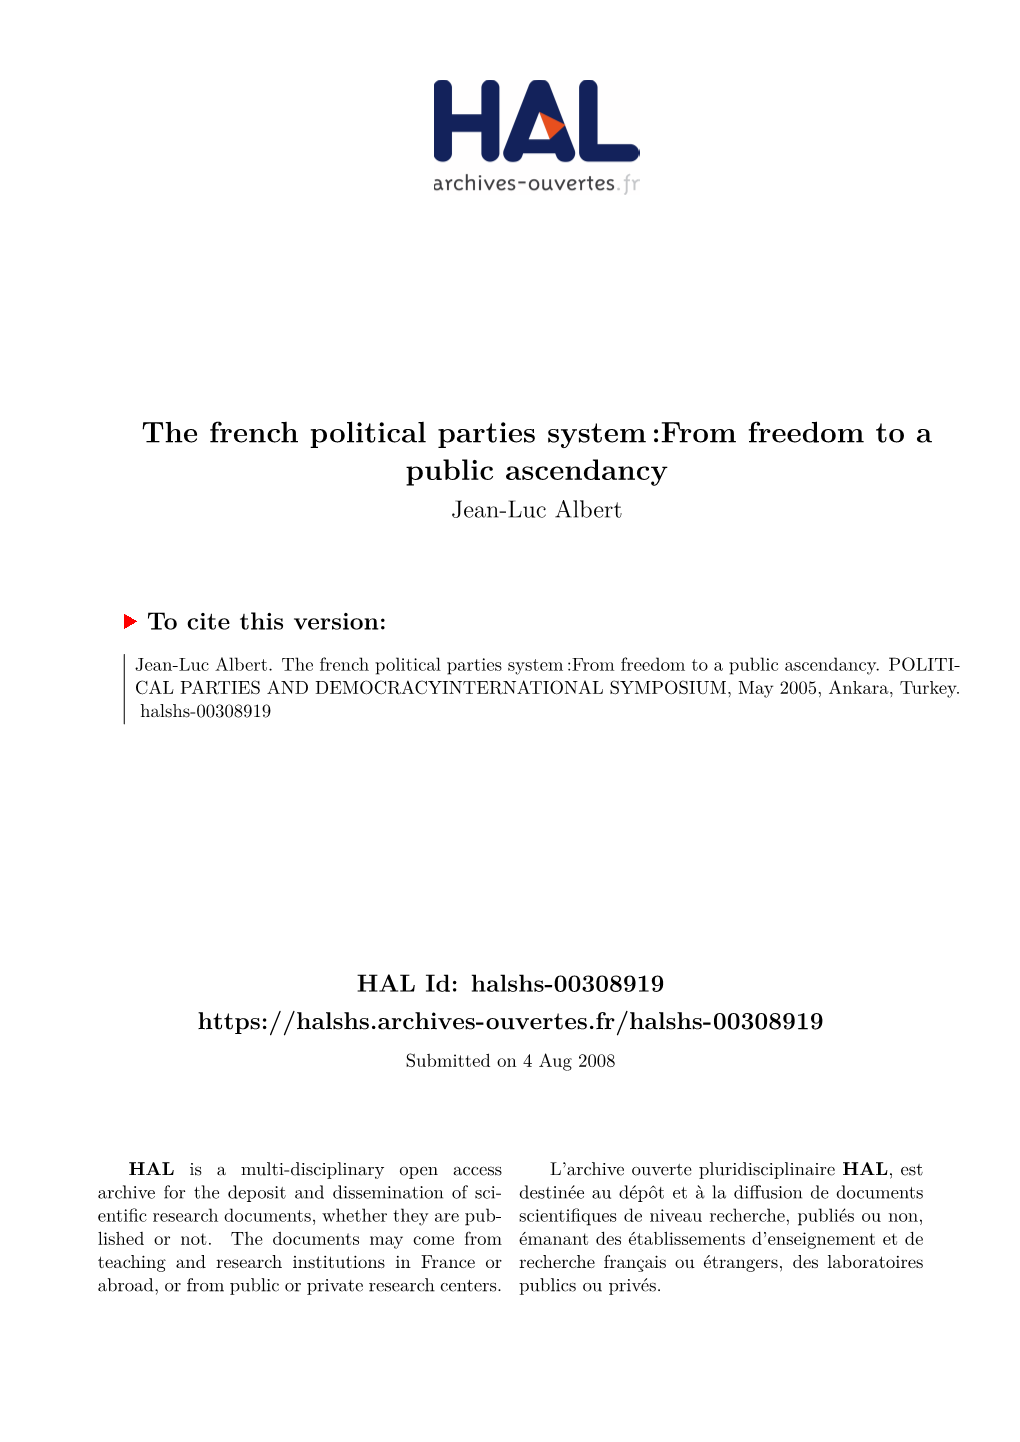 The French Political Parties System:From Freedom to a Public